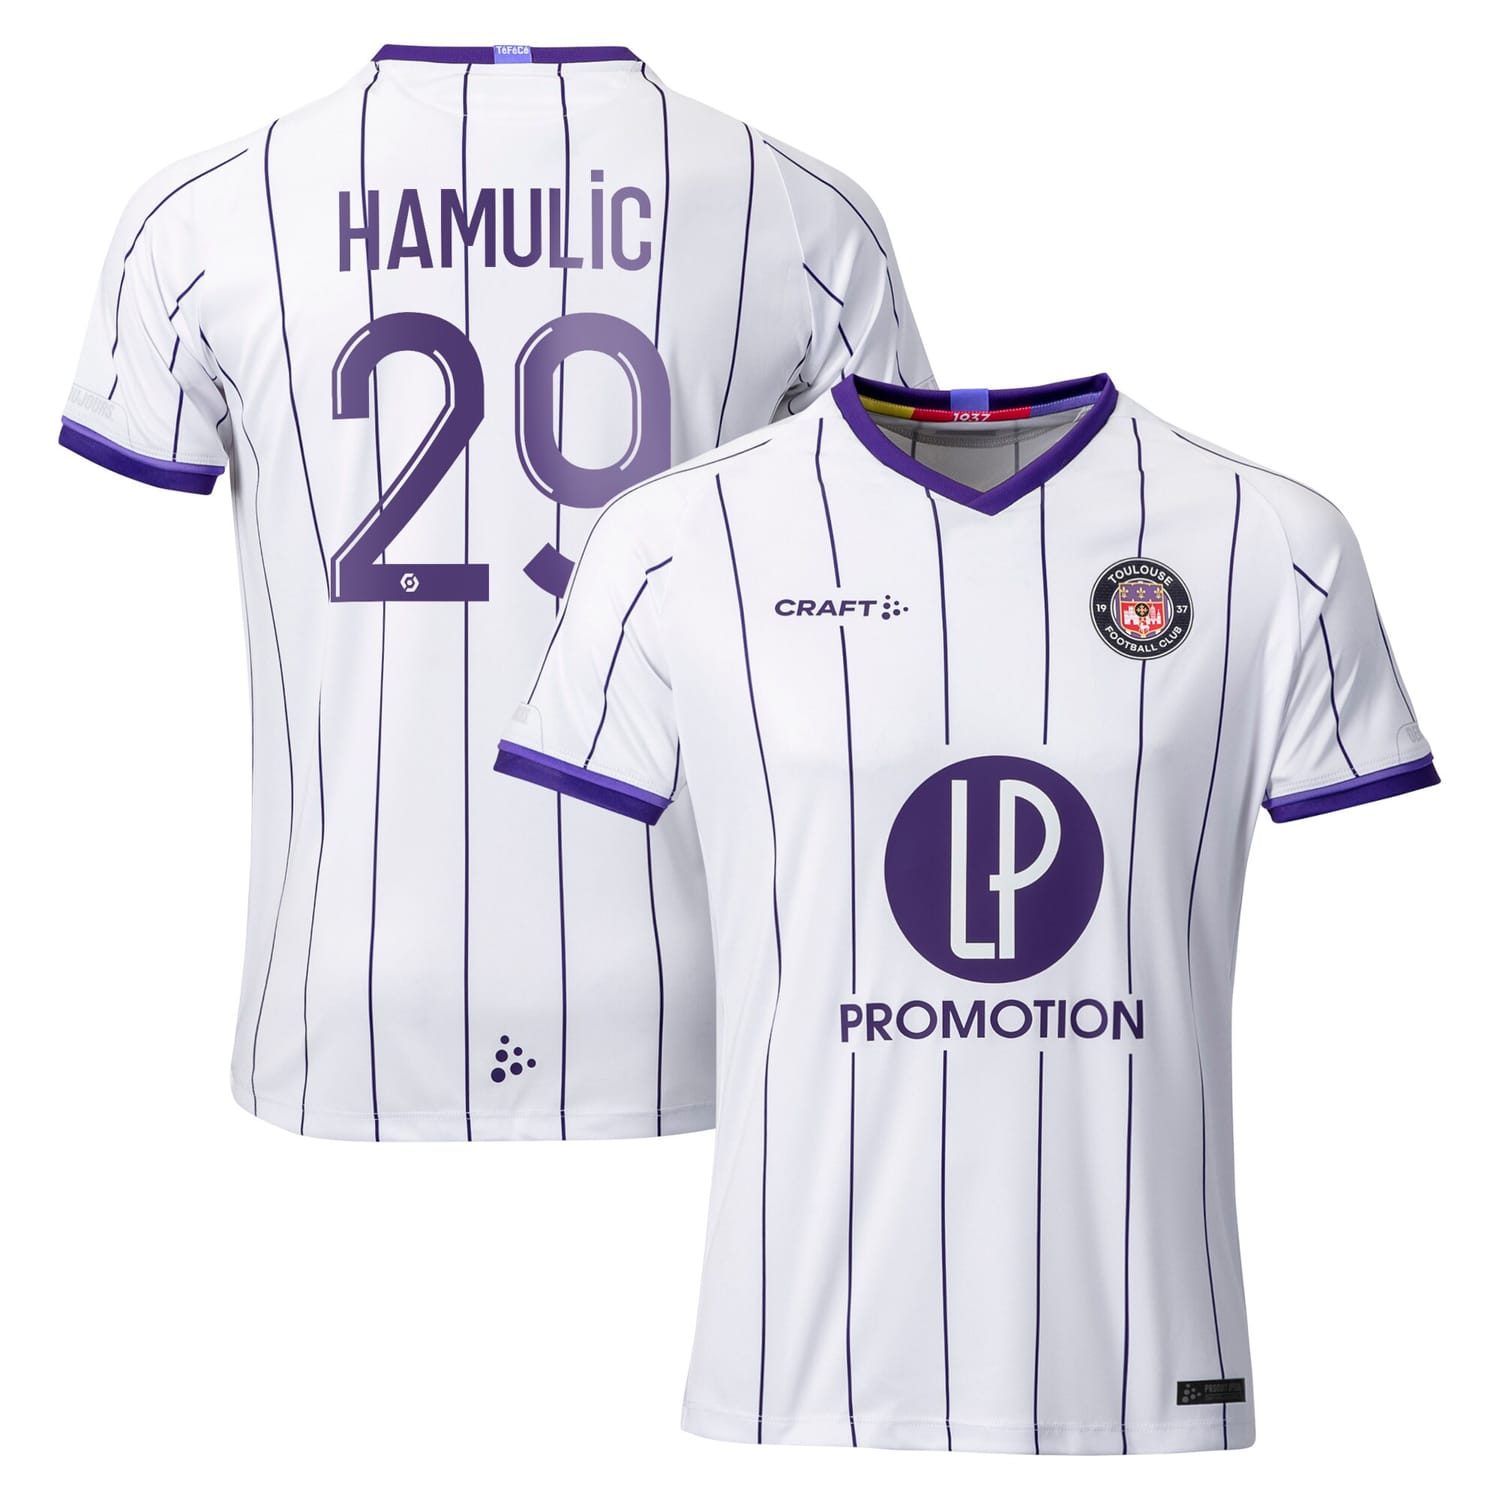 Ligue 1 Toulouse Home Jersey Shirt 2022-23 player Said Hamulic 29 printing for Women